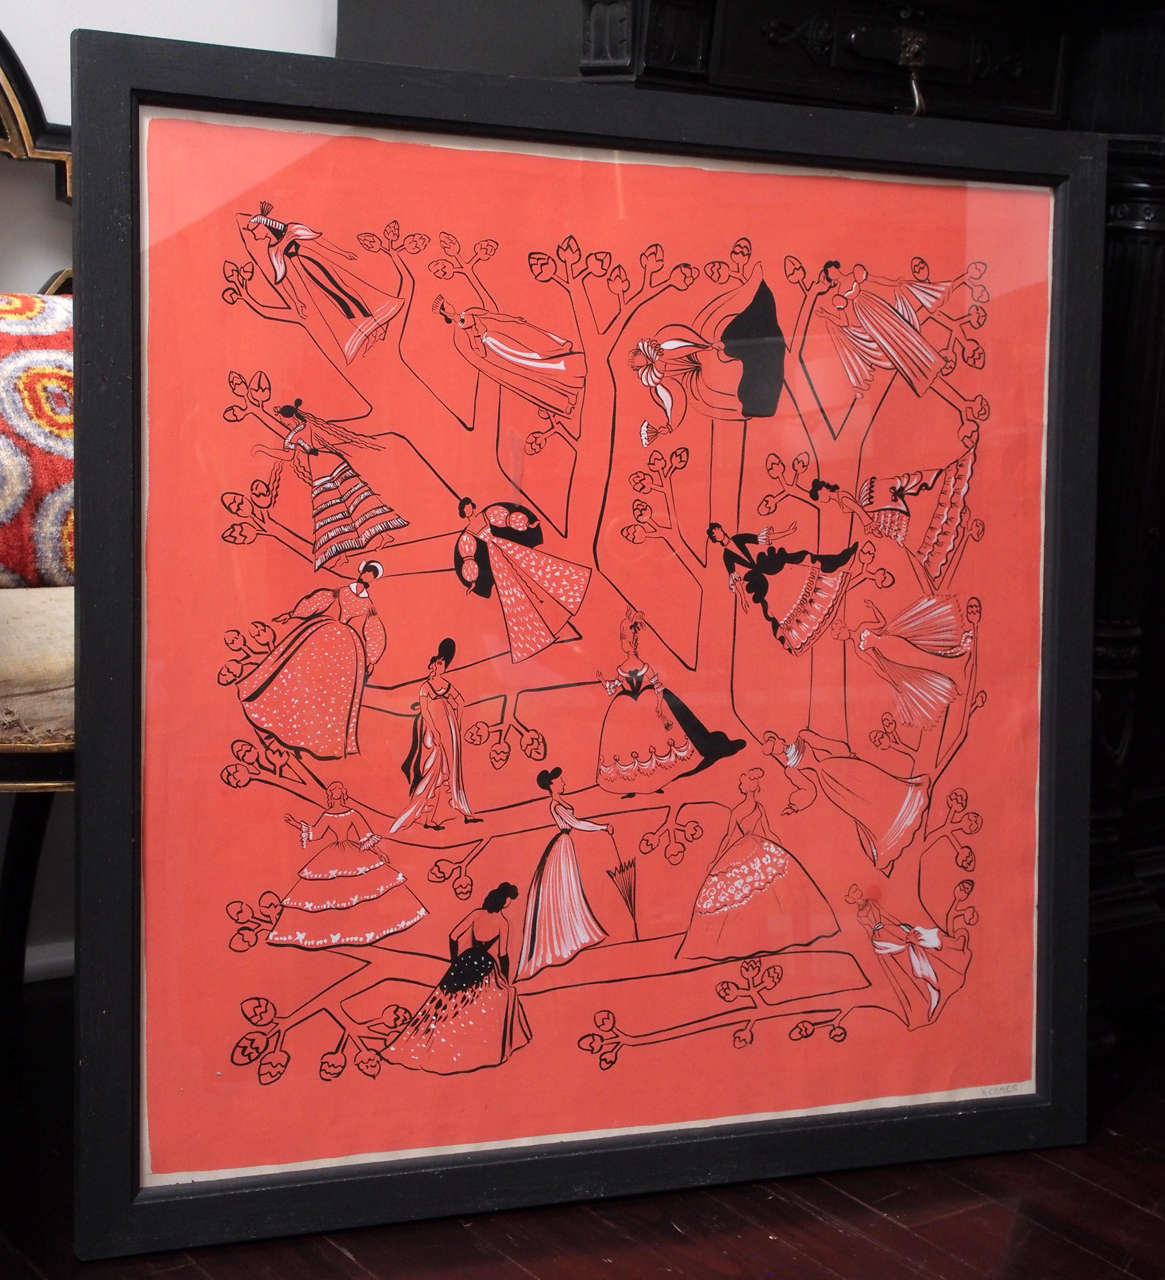 Vibrant gouache in pink, black and white, penciled marked "Hermes" lower right.